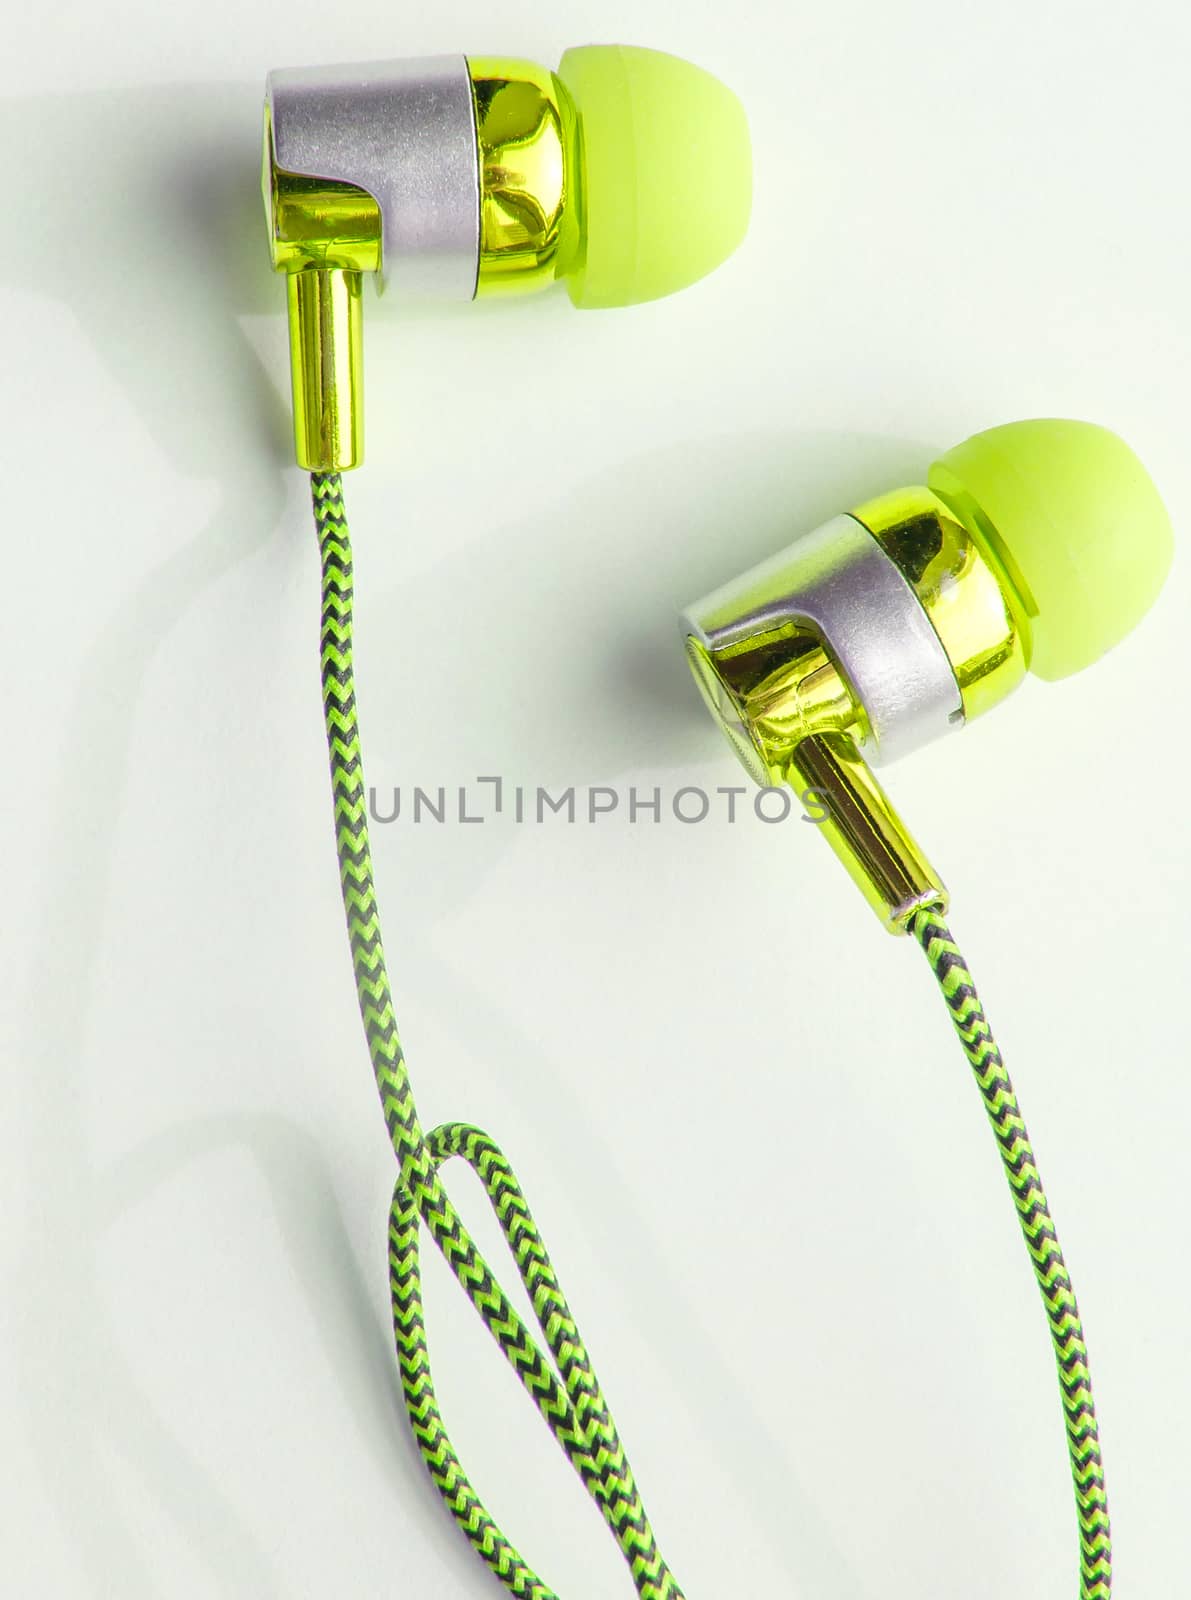 Yellow headphones on a white background close-up, vertical photo.